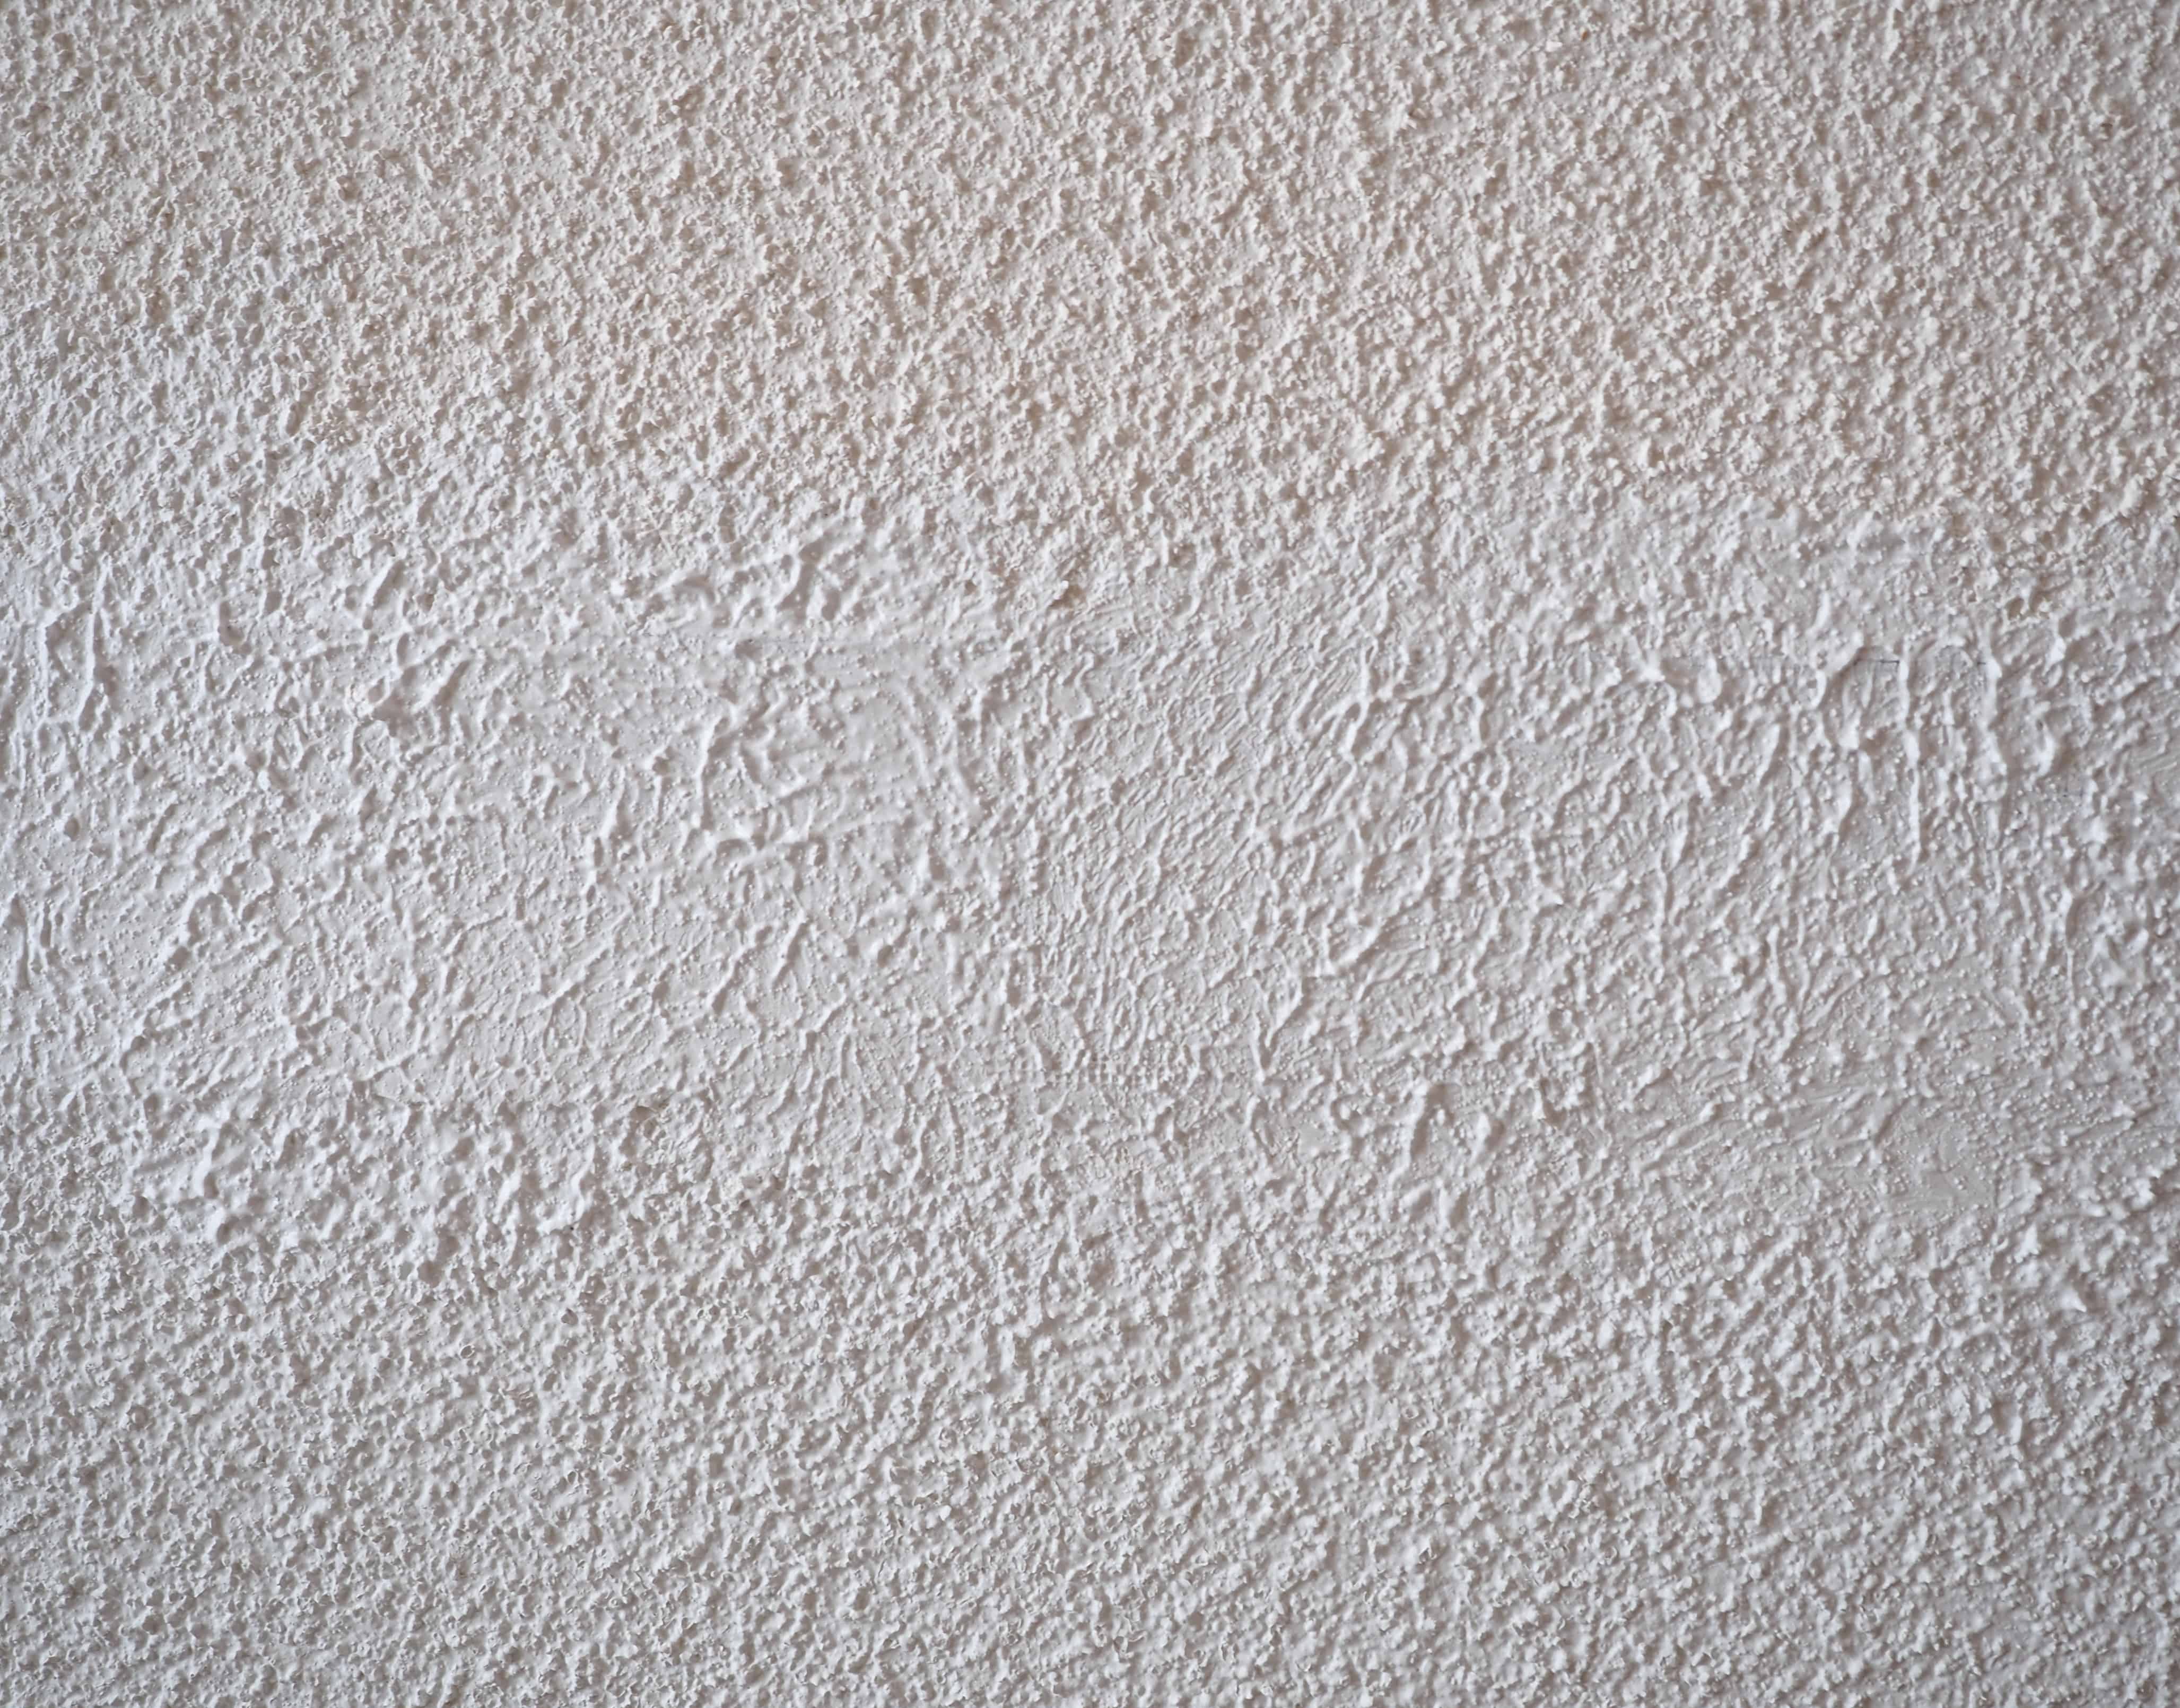 How To Complete A Popcorn Ceiling Repair The Homestud